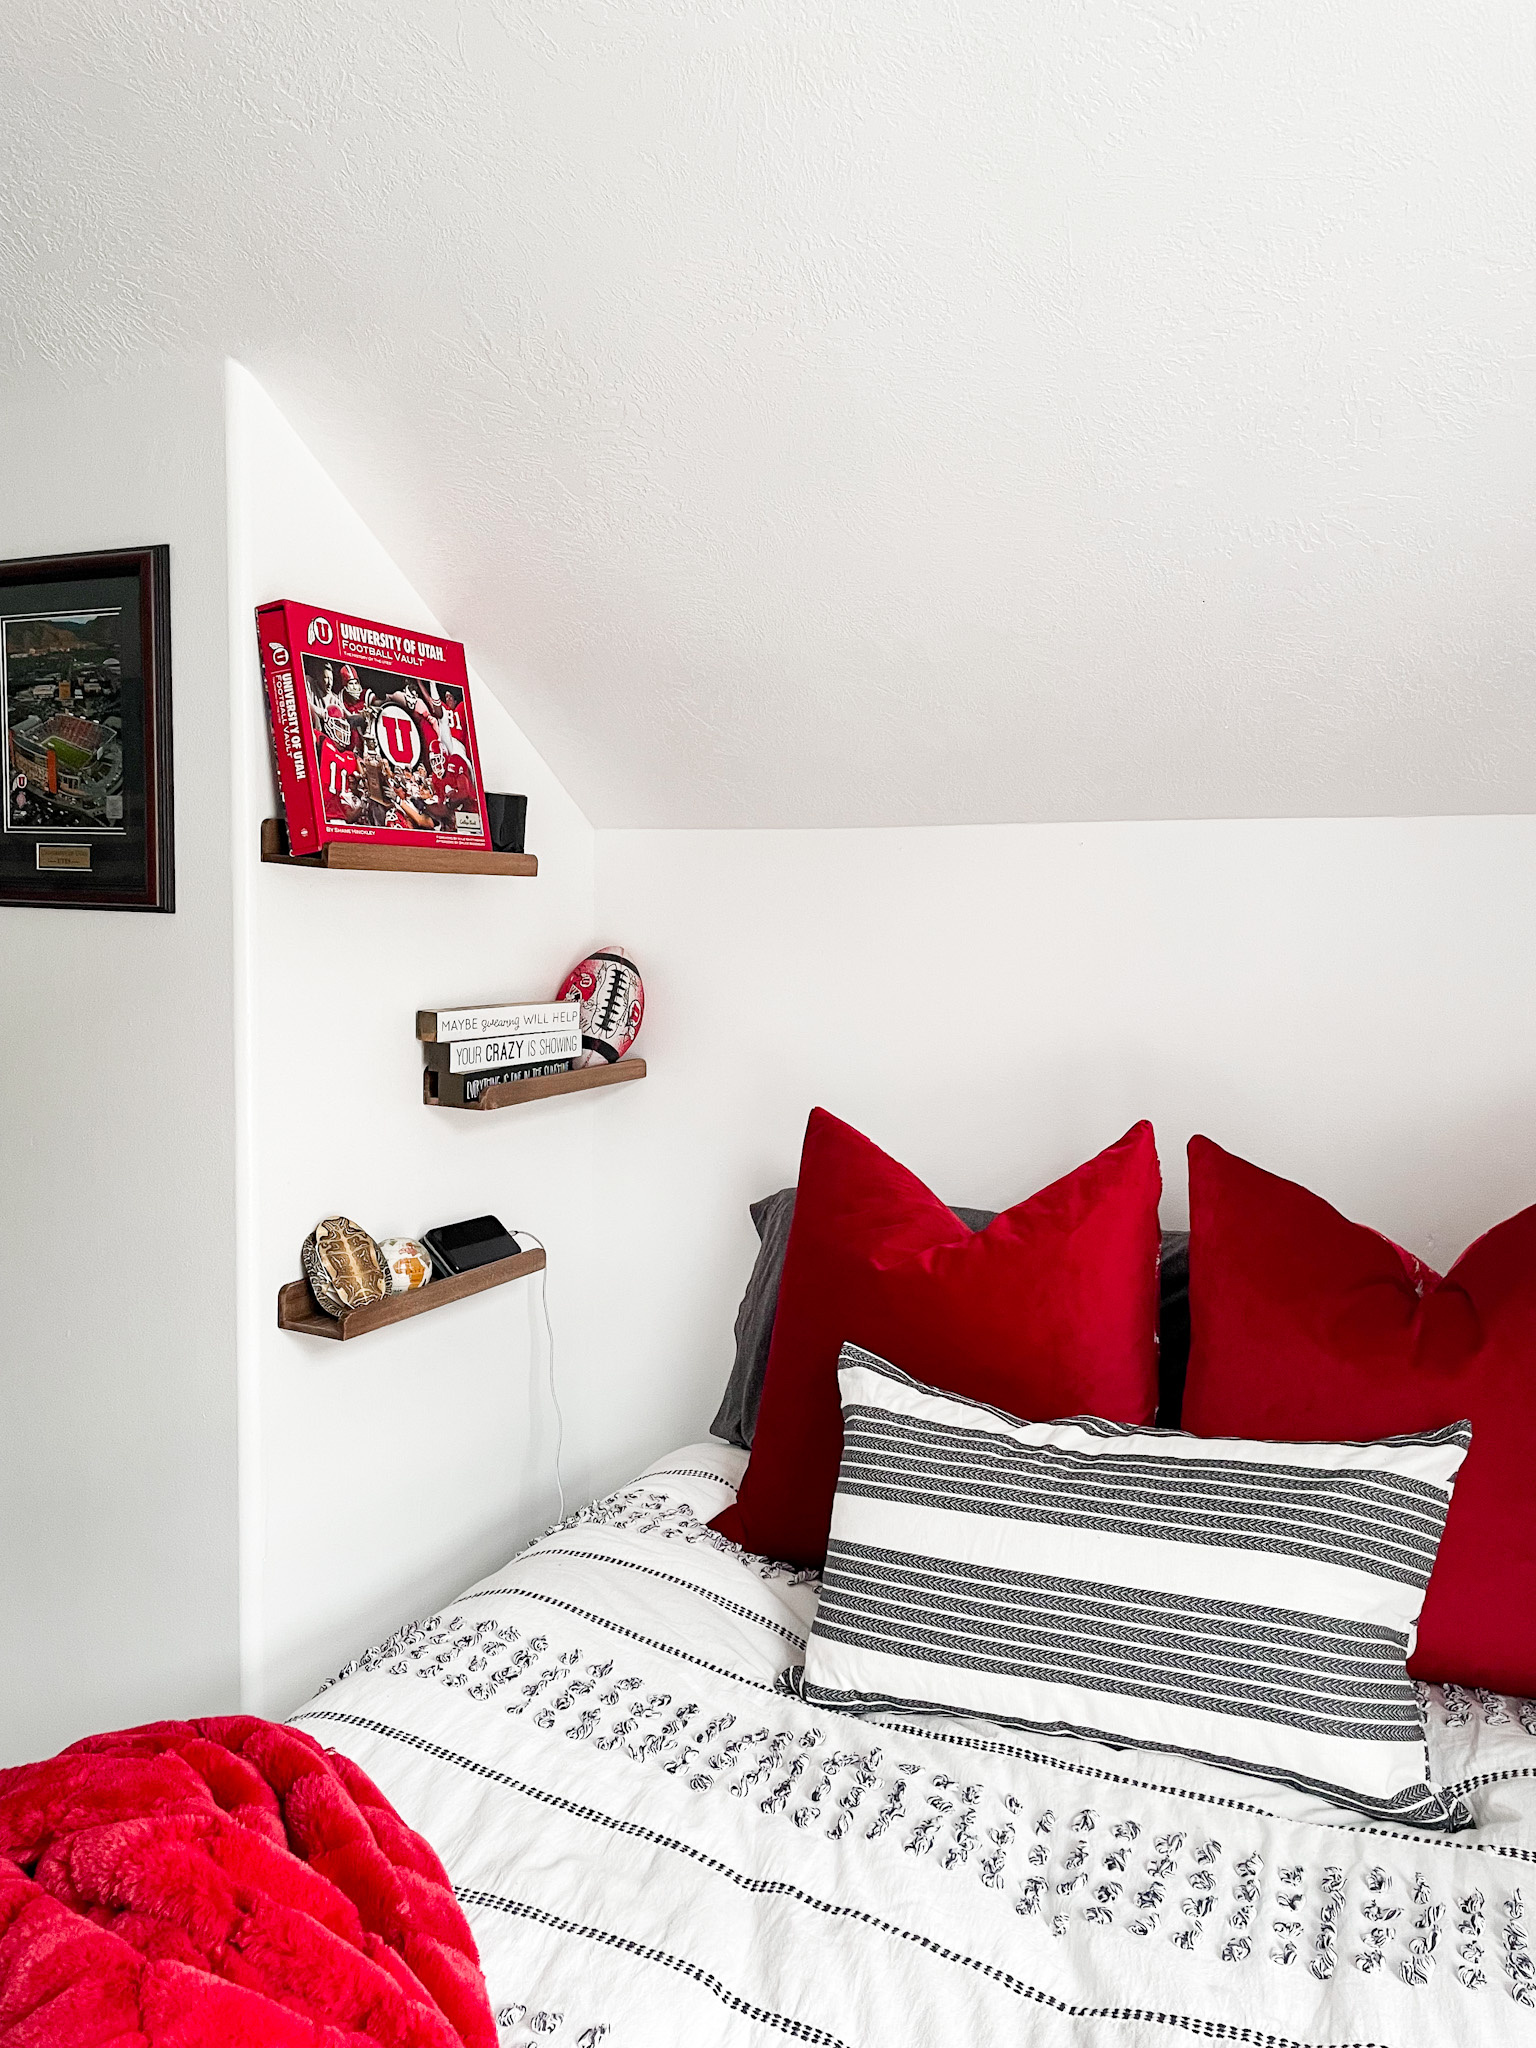 three shelves with book phone and football on them, red pillows and red blanket, white wall with shelves